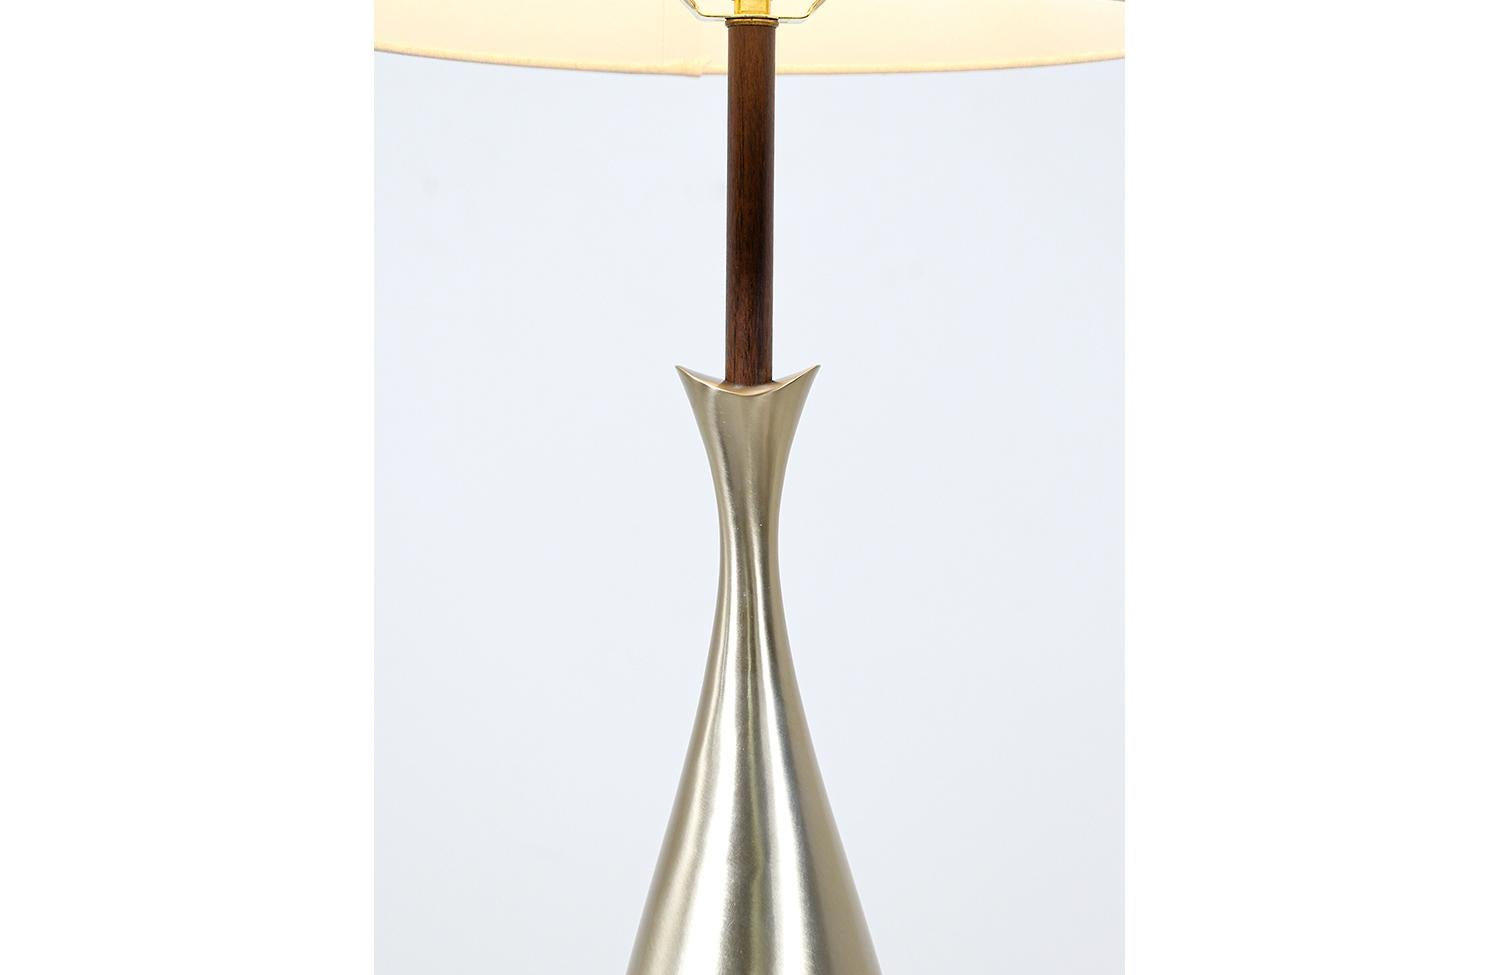 Expertly Restored - Mid-Century Modern Sculpted Brass Table Lamp by Laurel In Excellent Condition For Sale In Los Angeles, CA